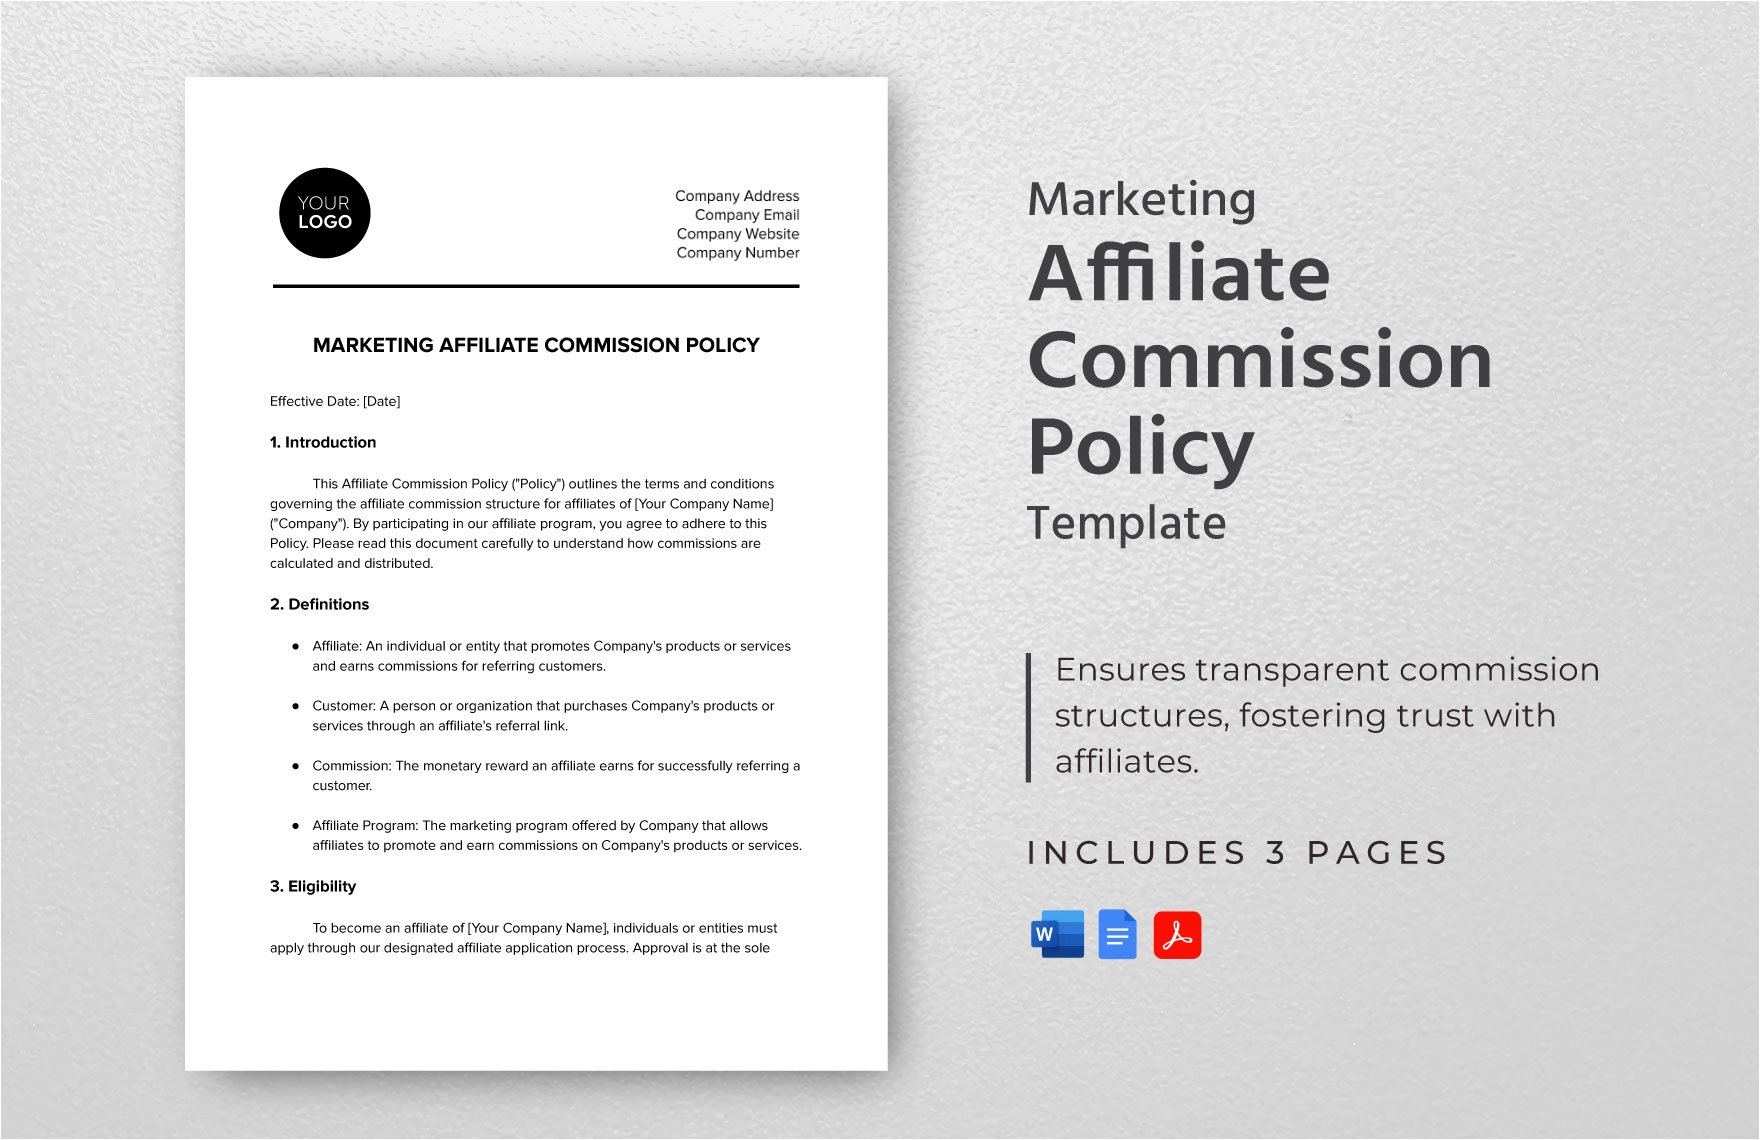 Marketing Affiliate Commission Policy Template